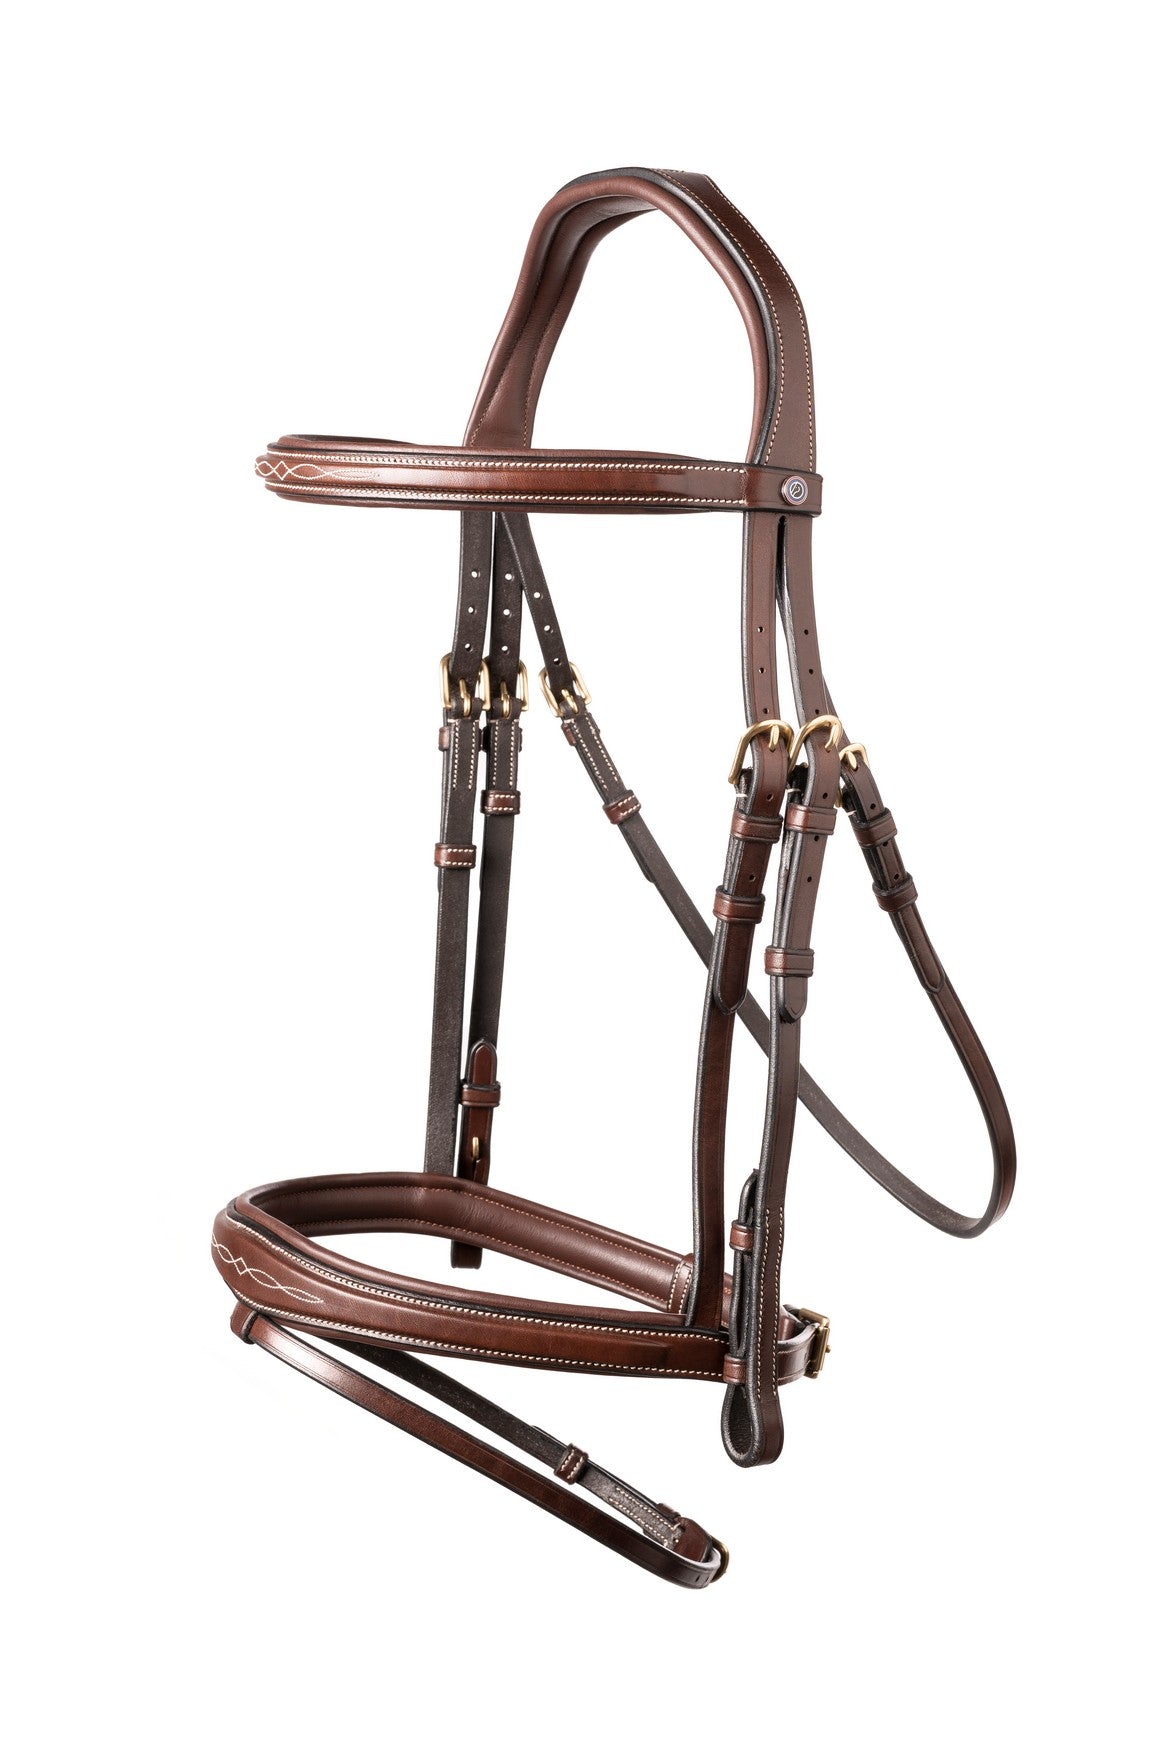 classic leather bridle brown gold